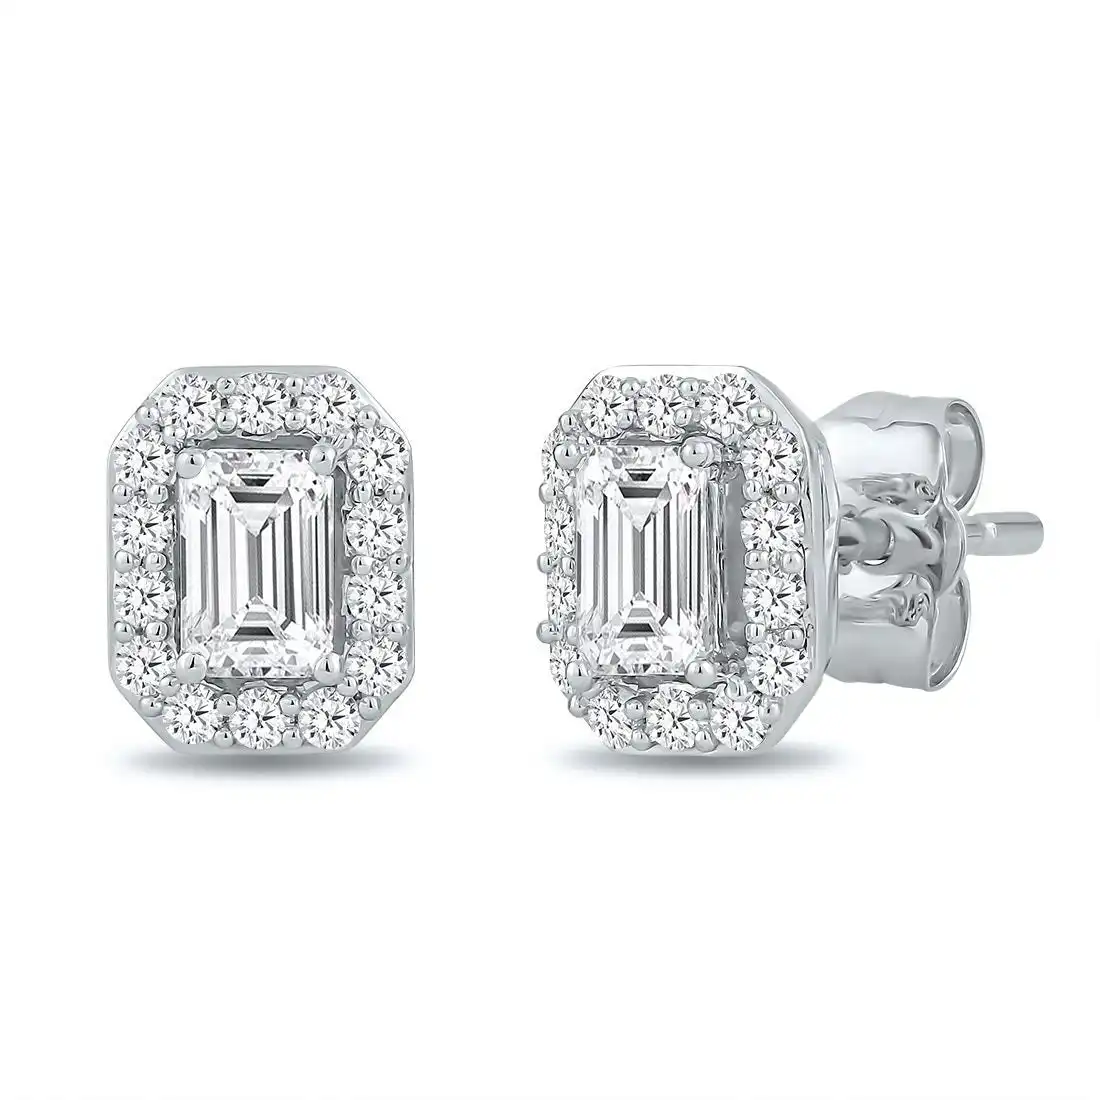 Tia Halo Emerald Earrings with 0.70ct of Diamonds in 9ct White Gold